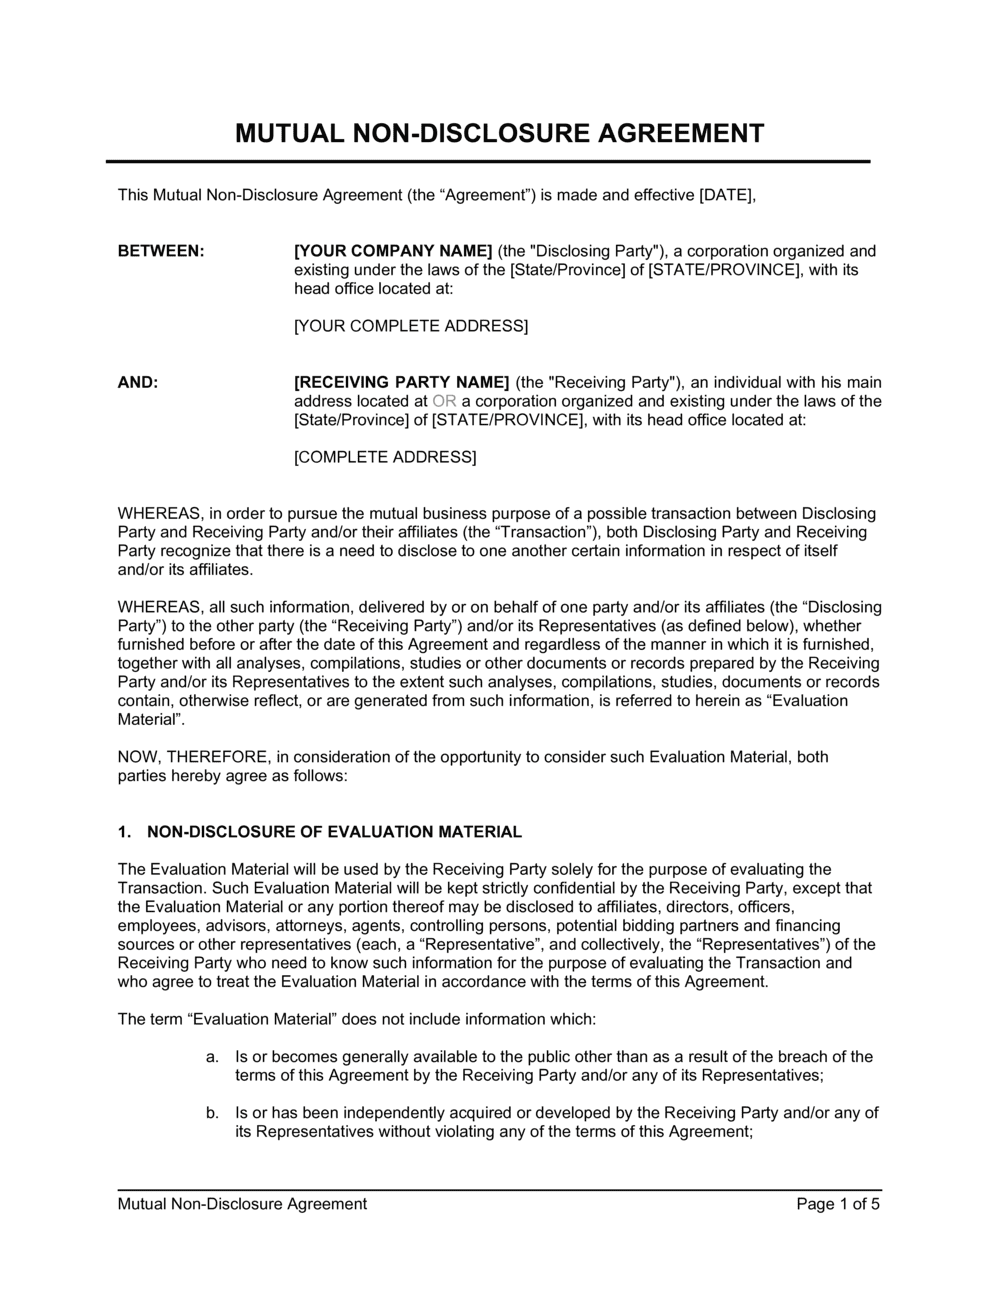 Mutual Non-Disclosure Agreement Template  by Business-in-a-Box™ With mutual non disclosure agreement template